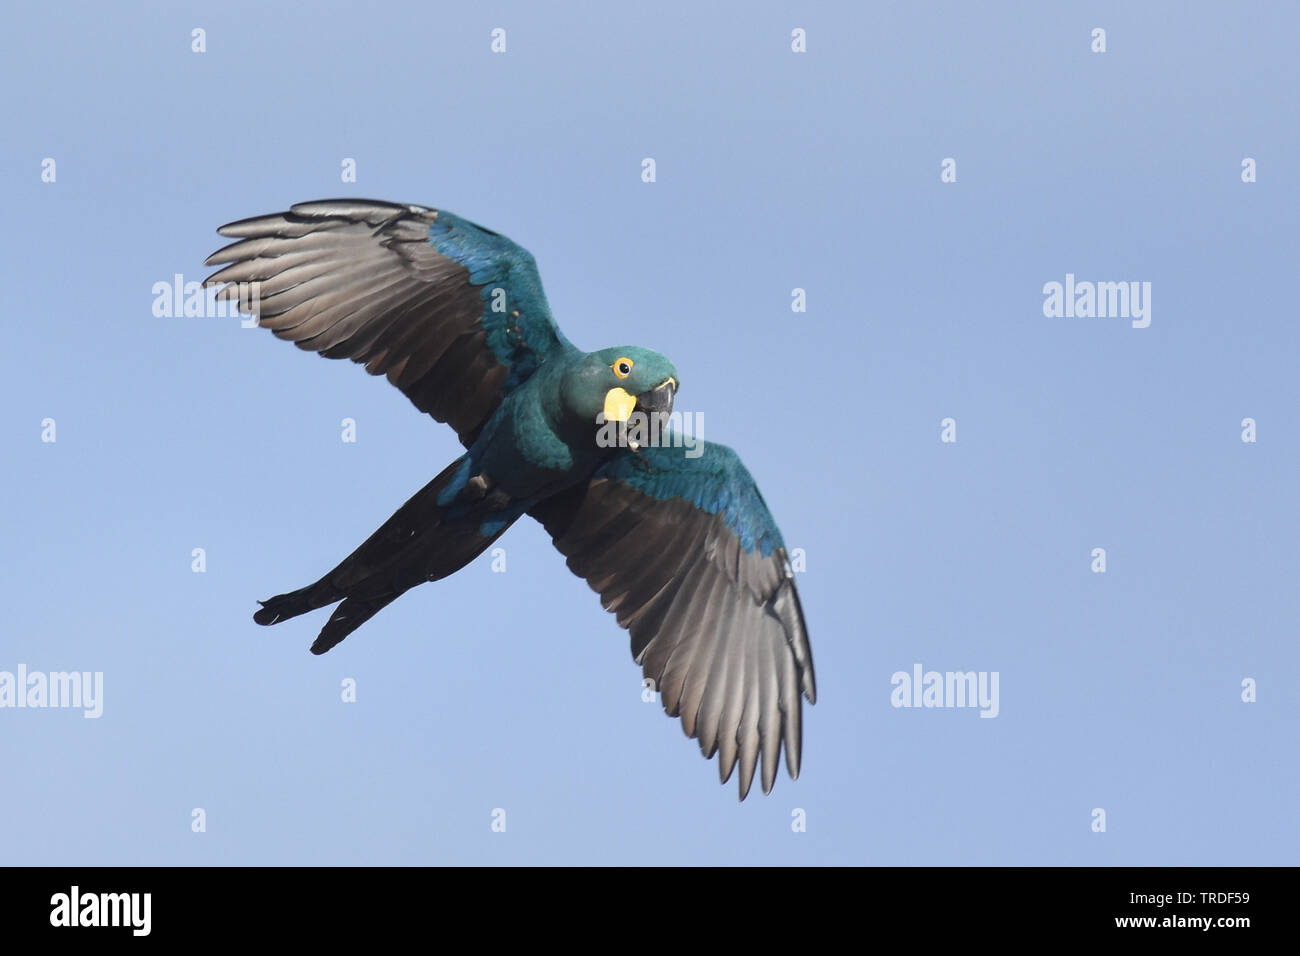 indigo macaw (Anodorhynchus leari), a very species with a highly restricted range in Brazil, Brazil Stock Photo